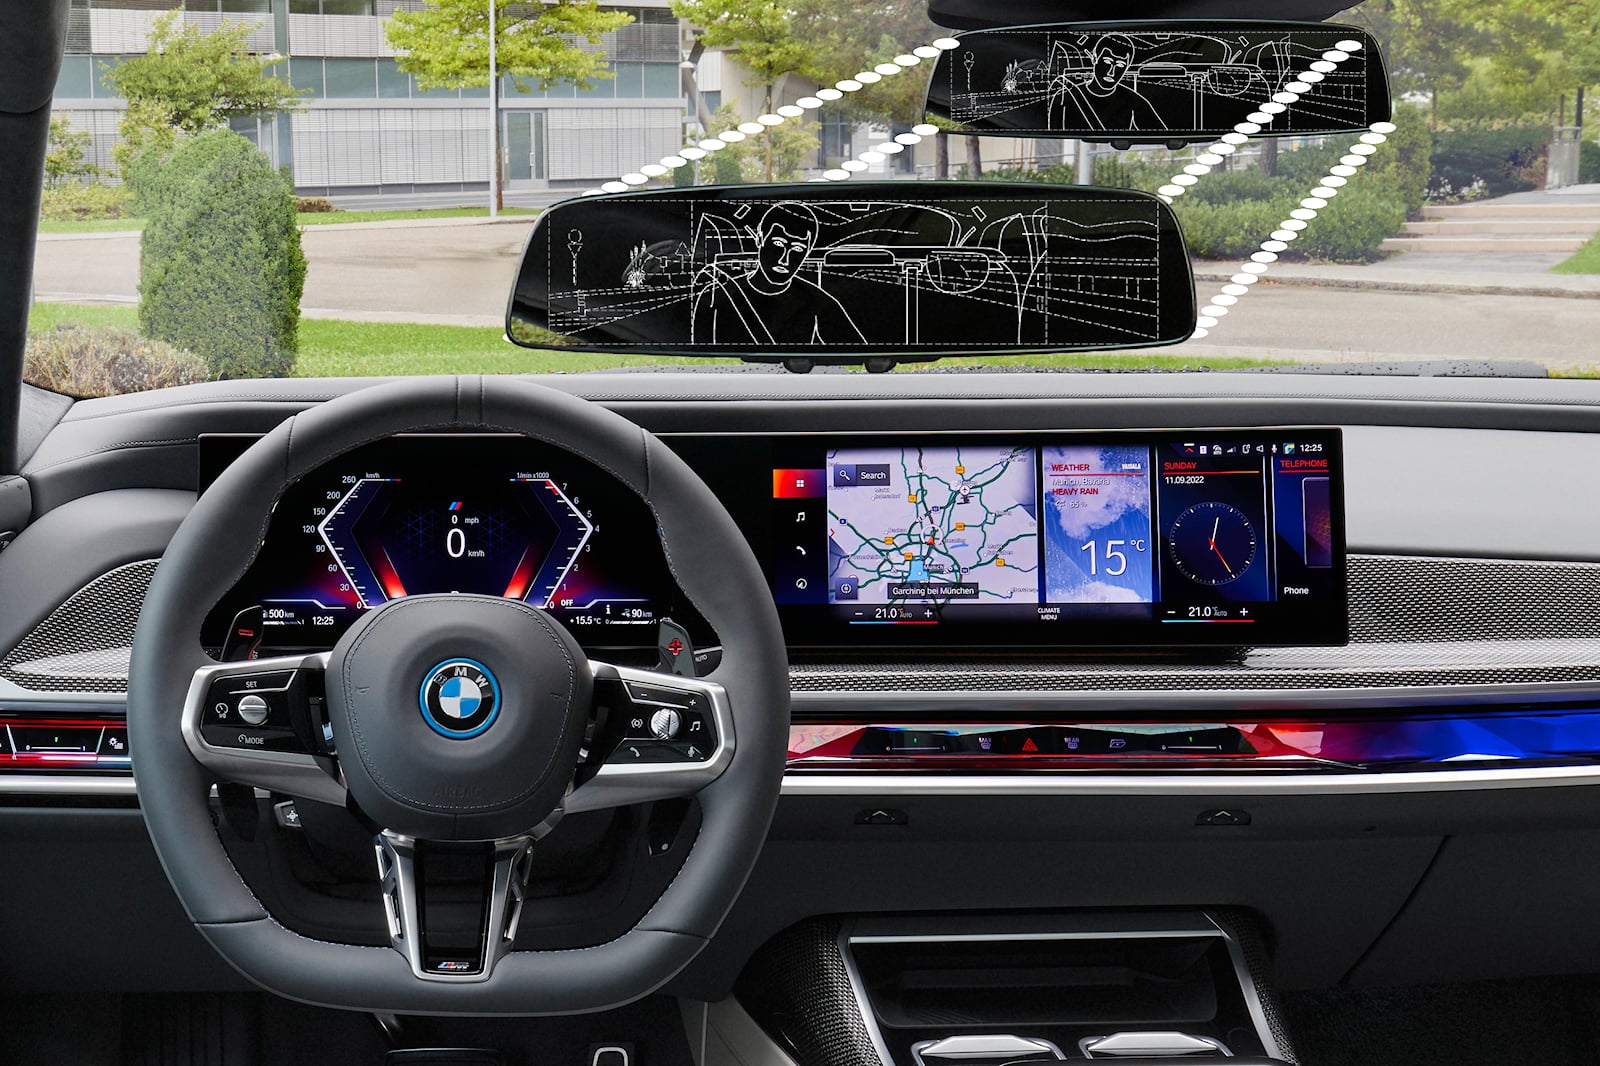 New BMW Digital Rearview Mirror Only Shows You The Most Important Things